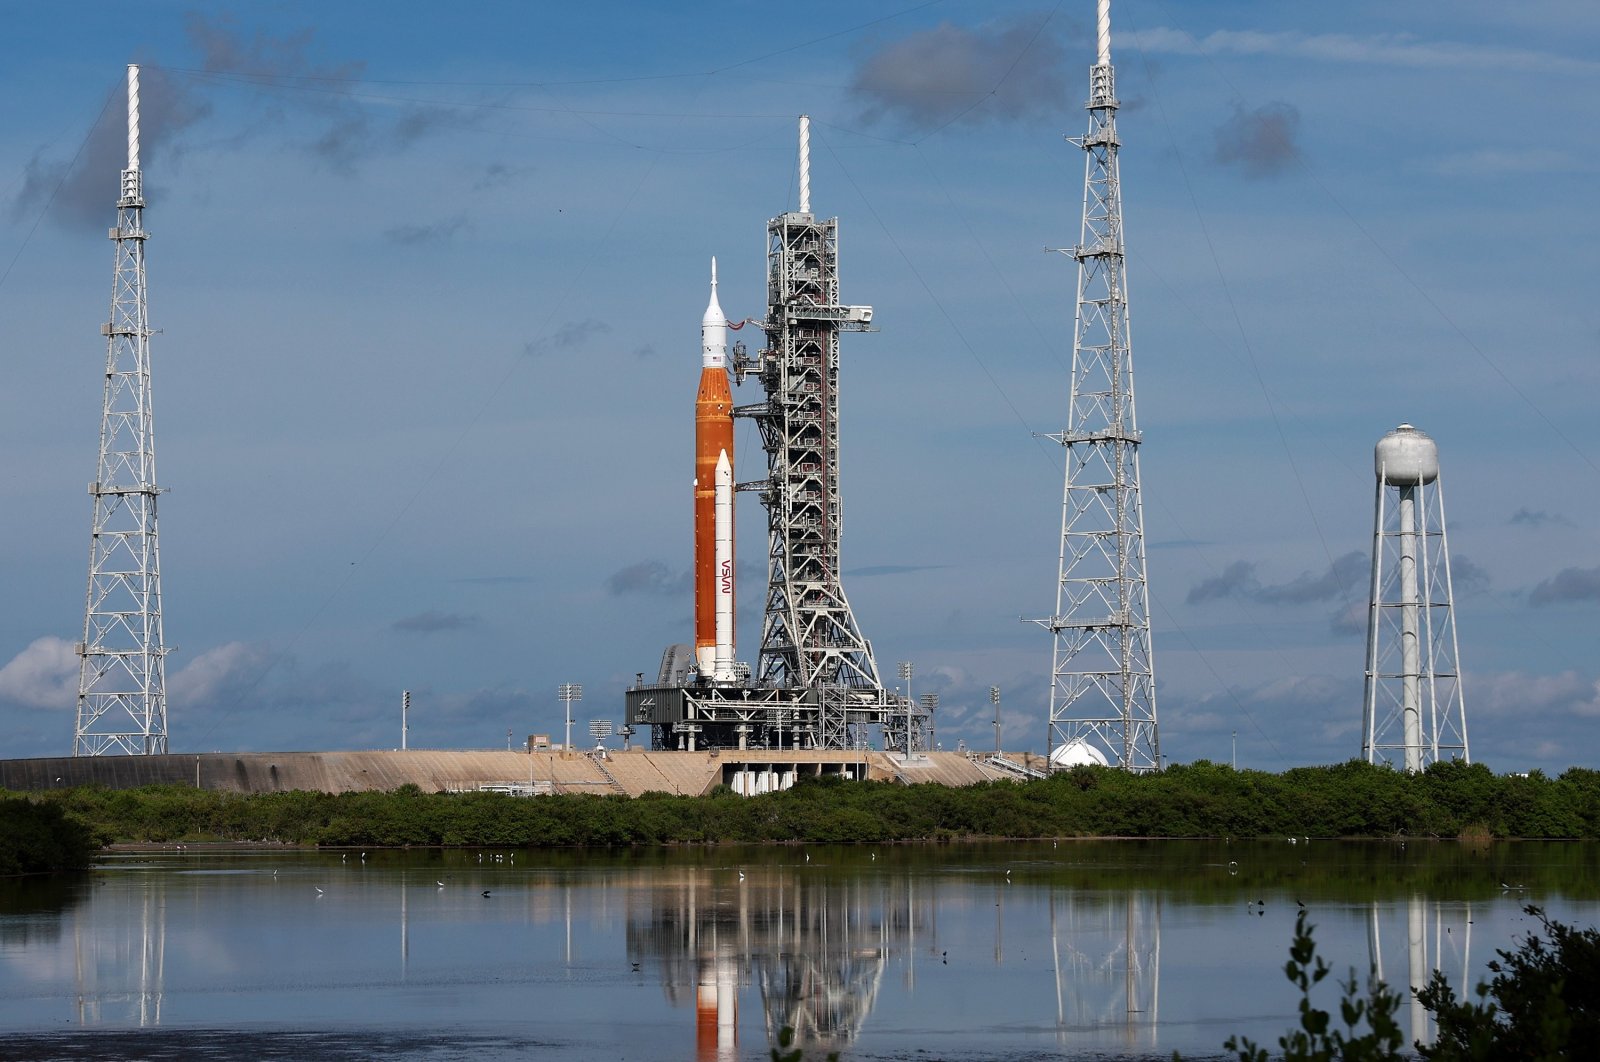 NASA’s Artemis I rocket sits on launch pad 39-B at Kennedy Space Center as it is prepared for an unmanned flight around the moon, in Cape Canaveral, Florida, U.S., Aug. 27, 2022. (AFP Photo)